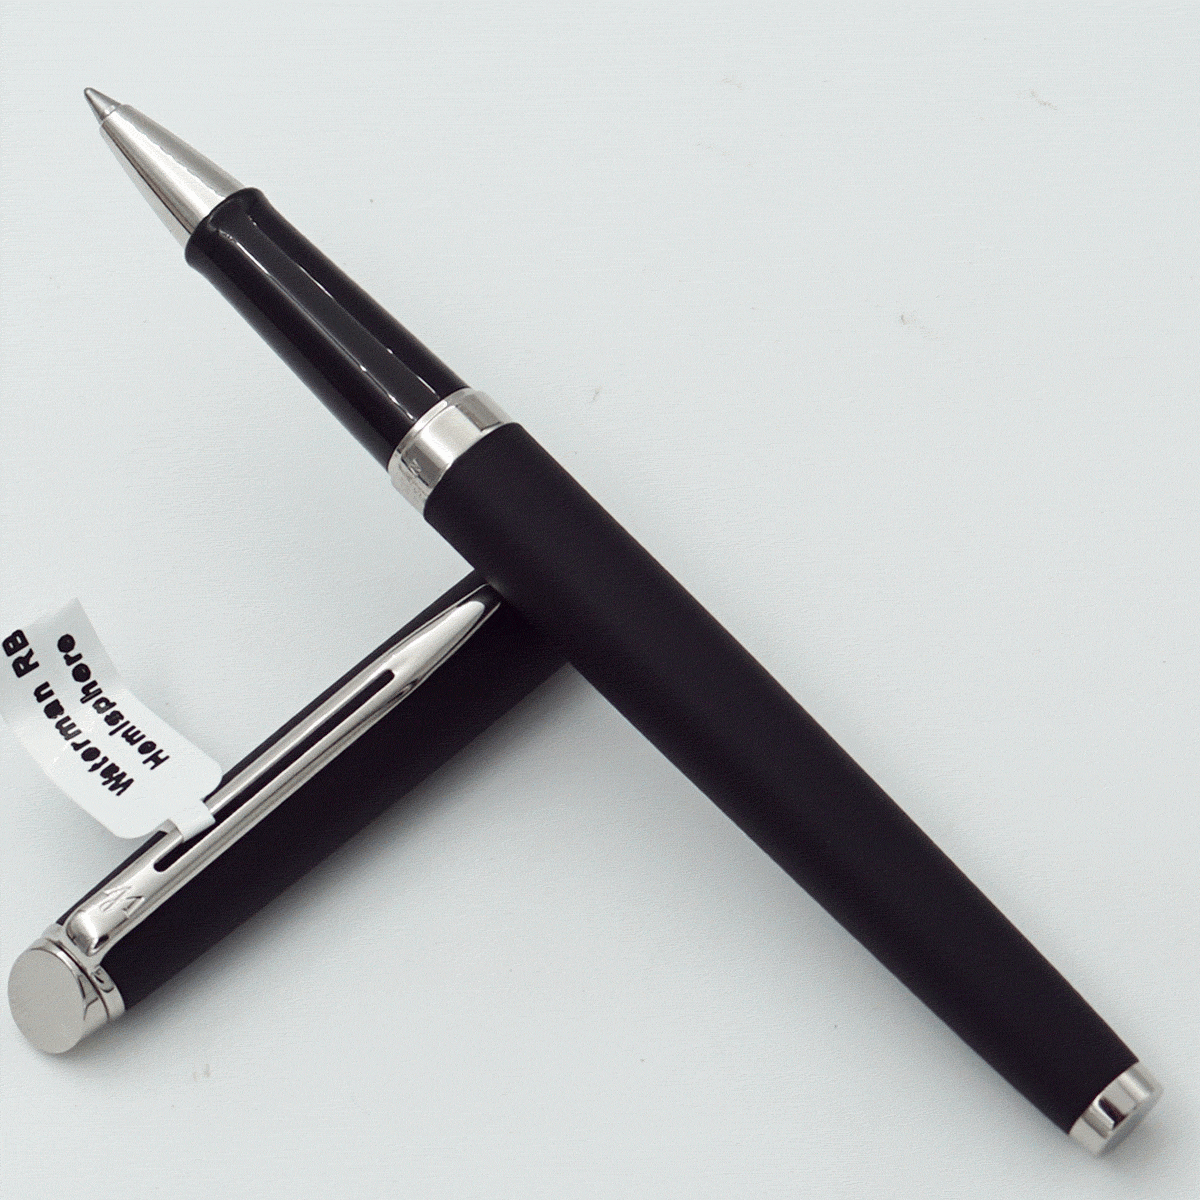 Waterman Hemisphere Matte Black Color Body With Chrome Trims And Silver Clip Medium Tip Roller Ball Pen SKU 24495